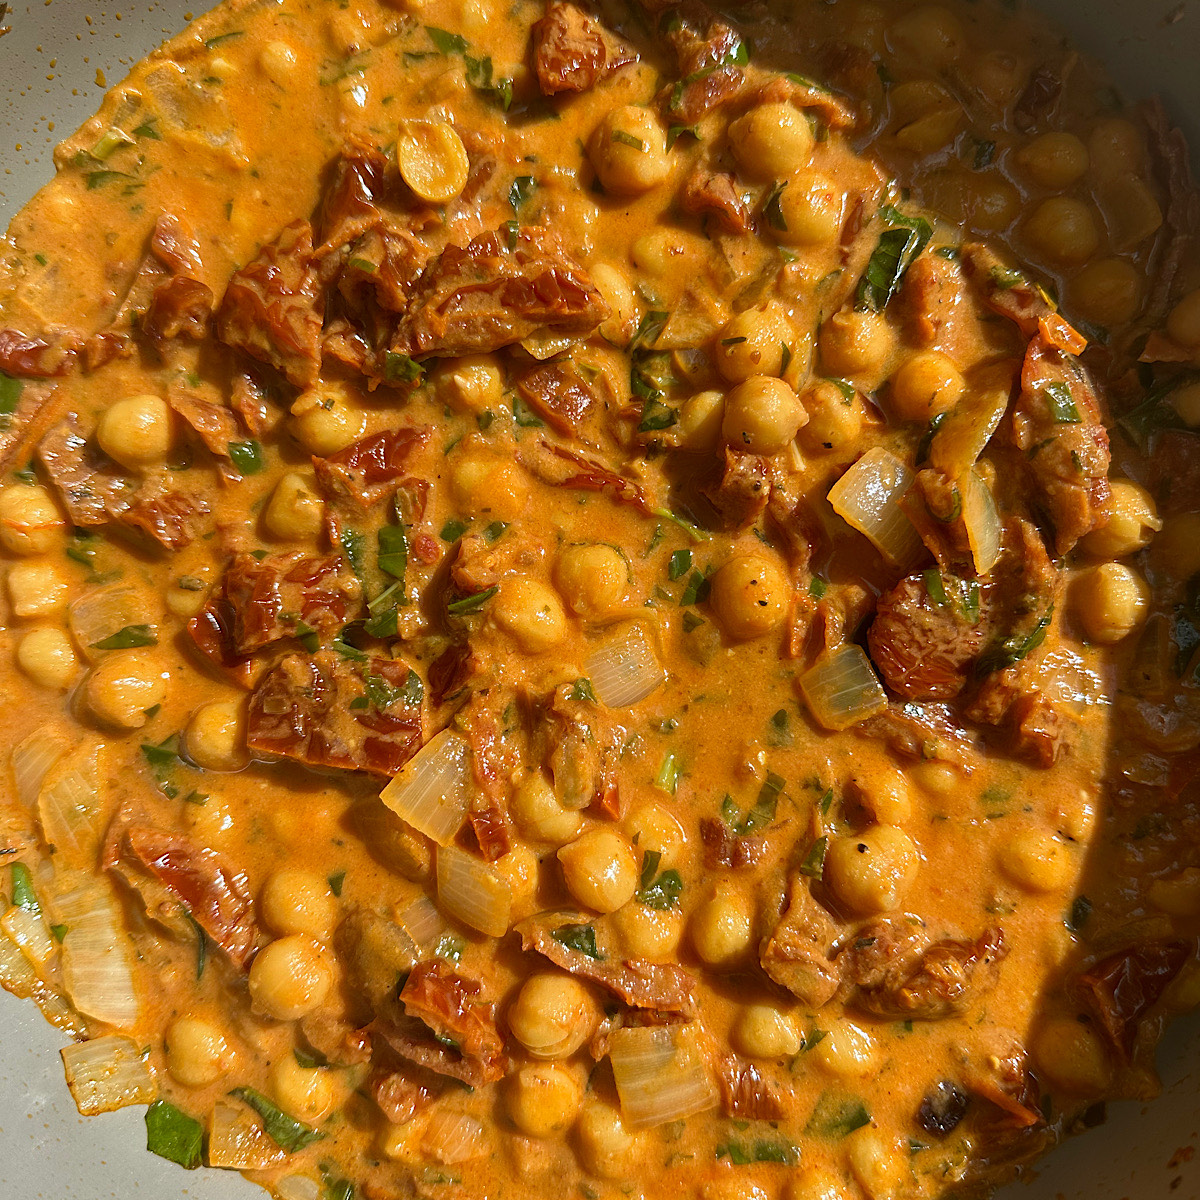 Tuscan chickpeas in skillet